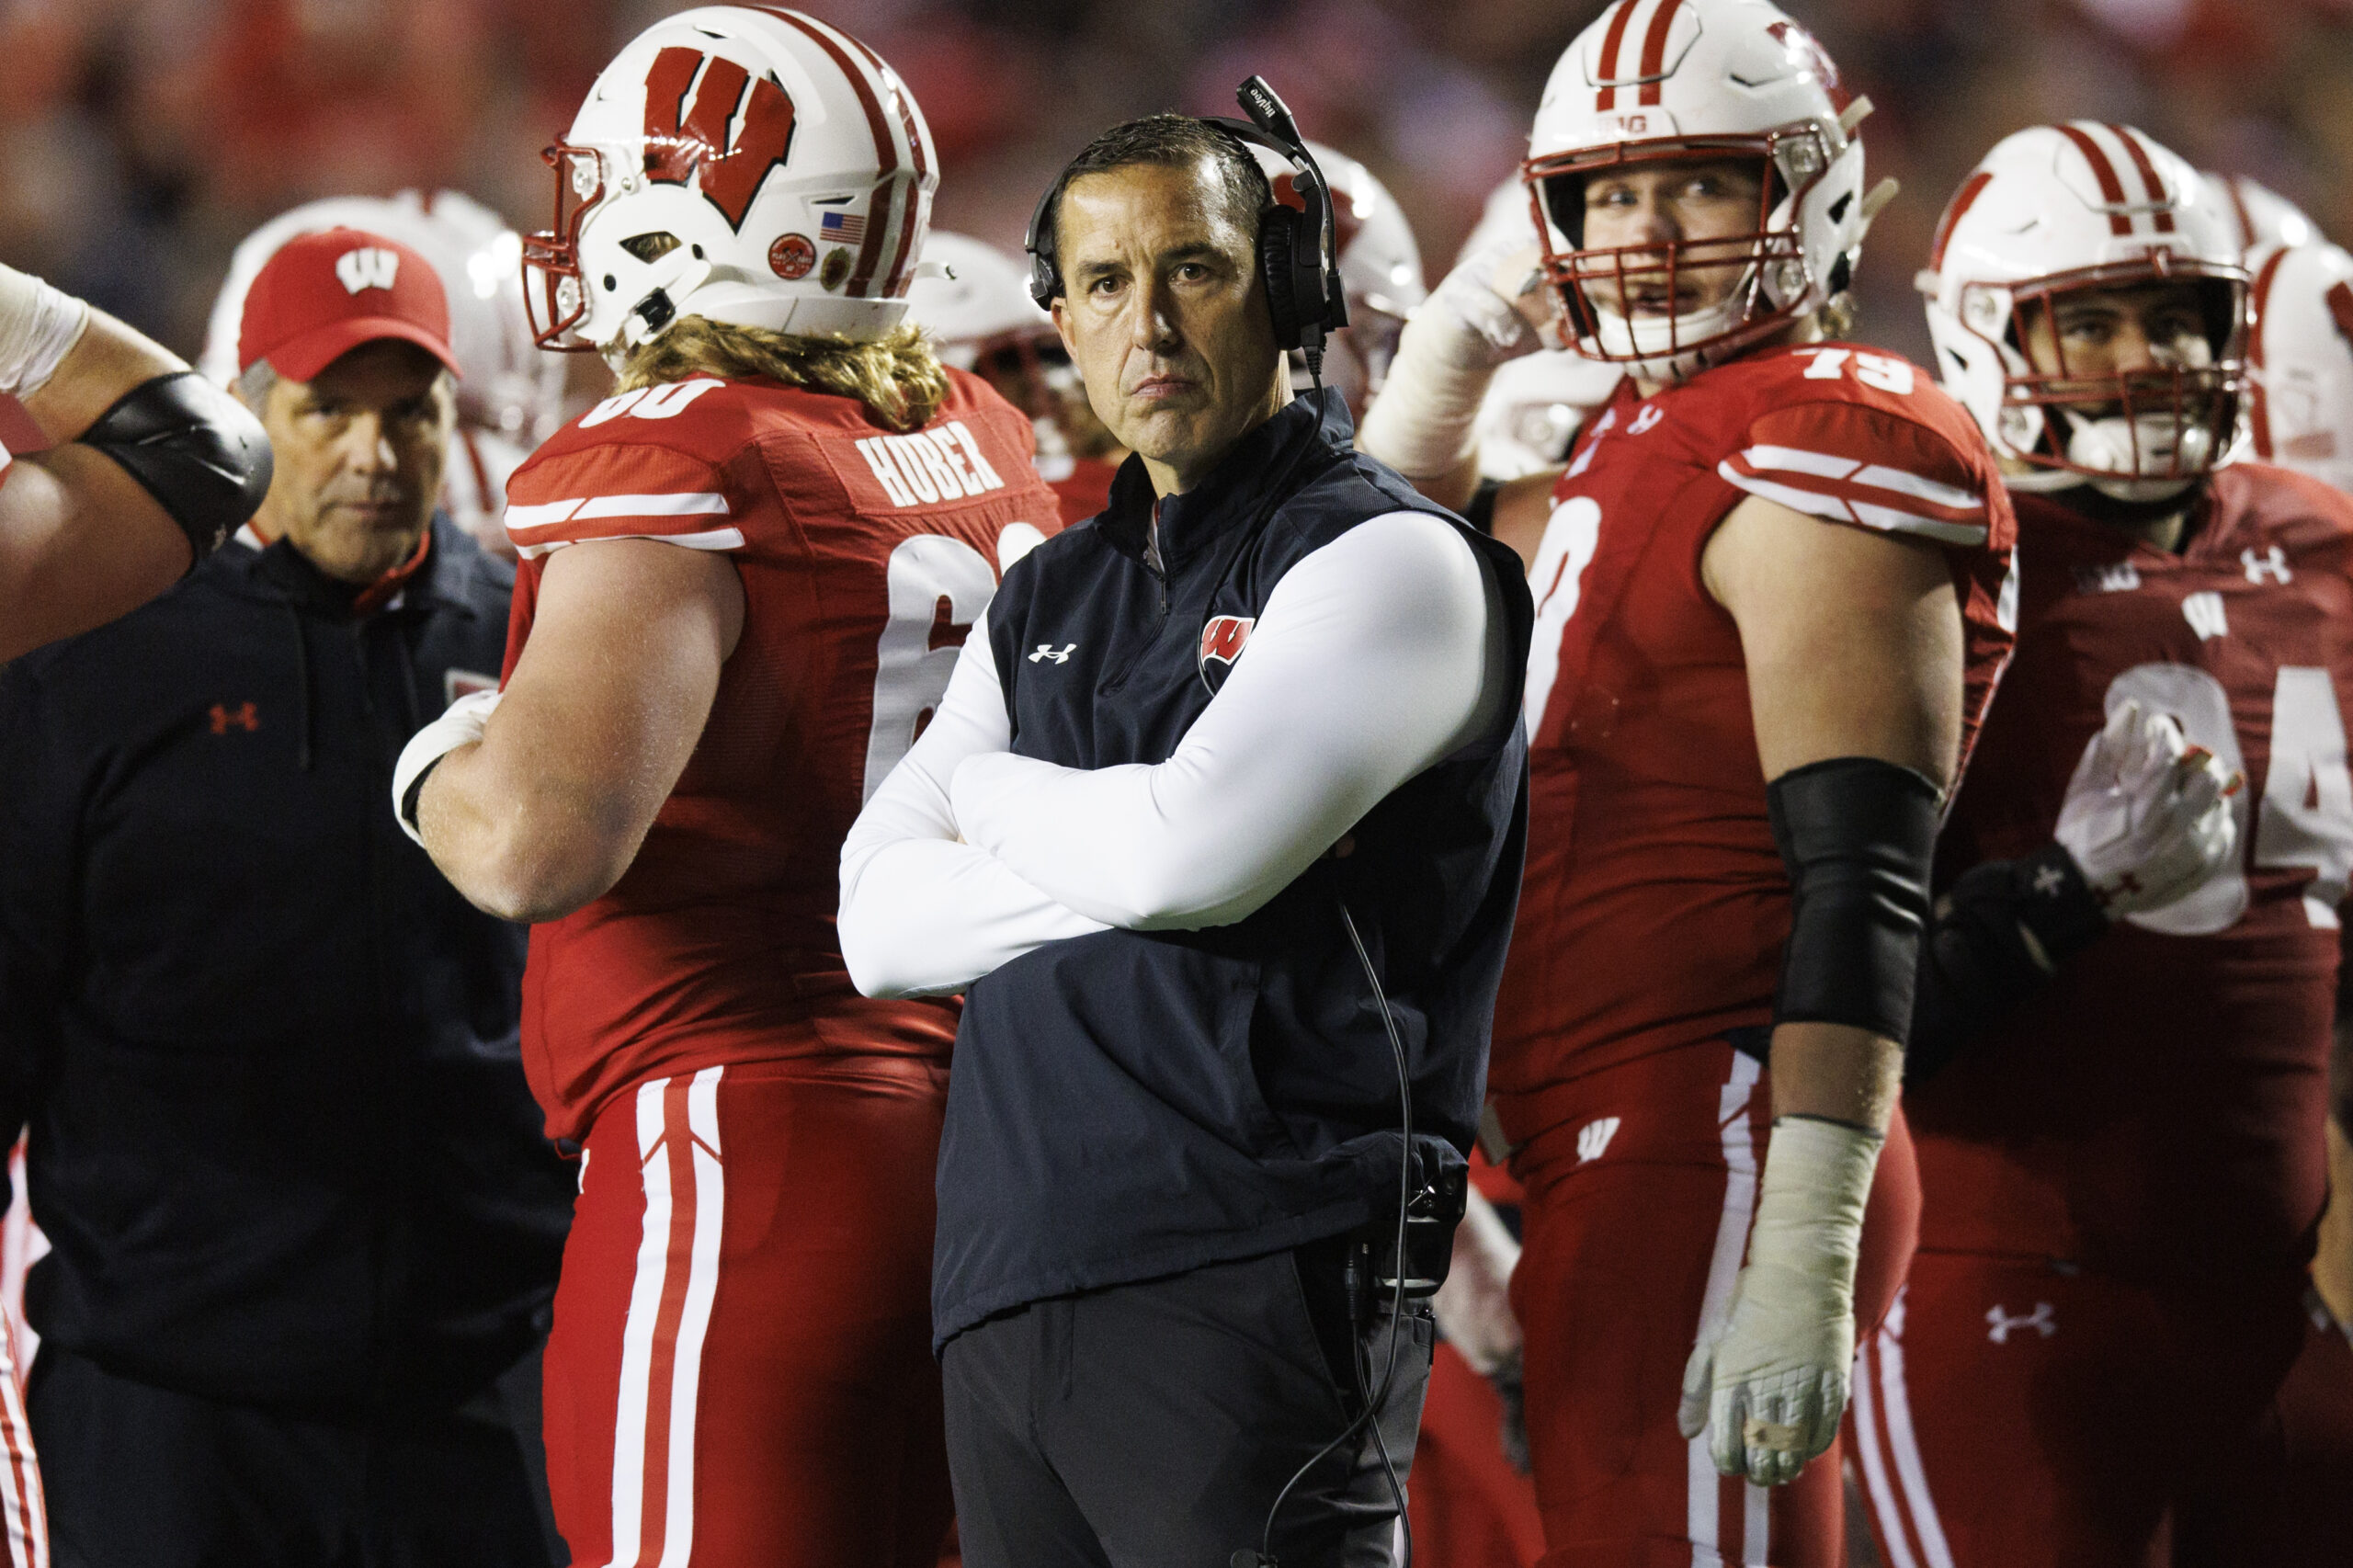 Wisconsin Badgers football head coach Luke Fickell on the sidelines vs. Ohio State